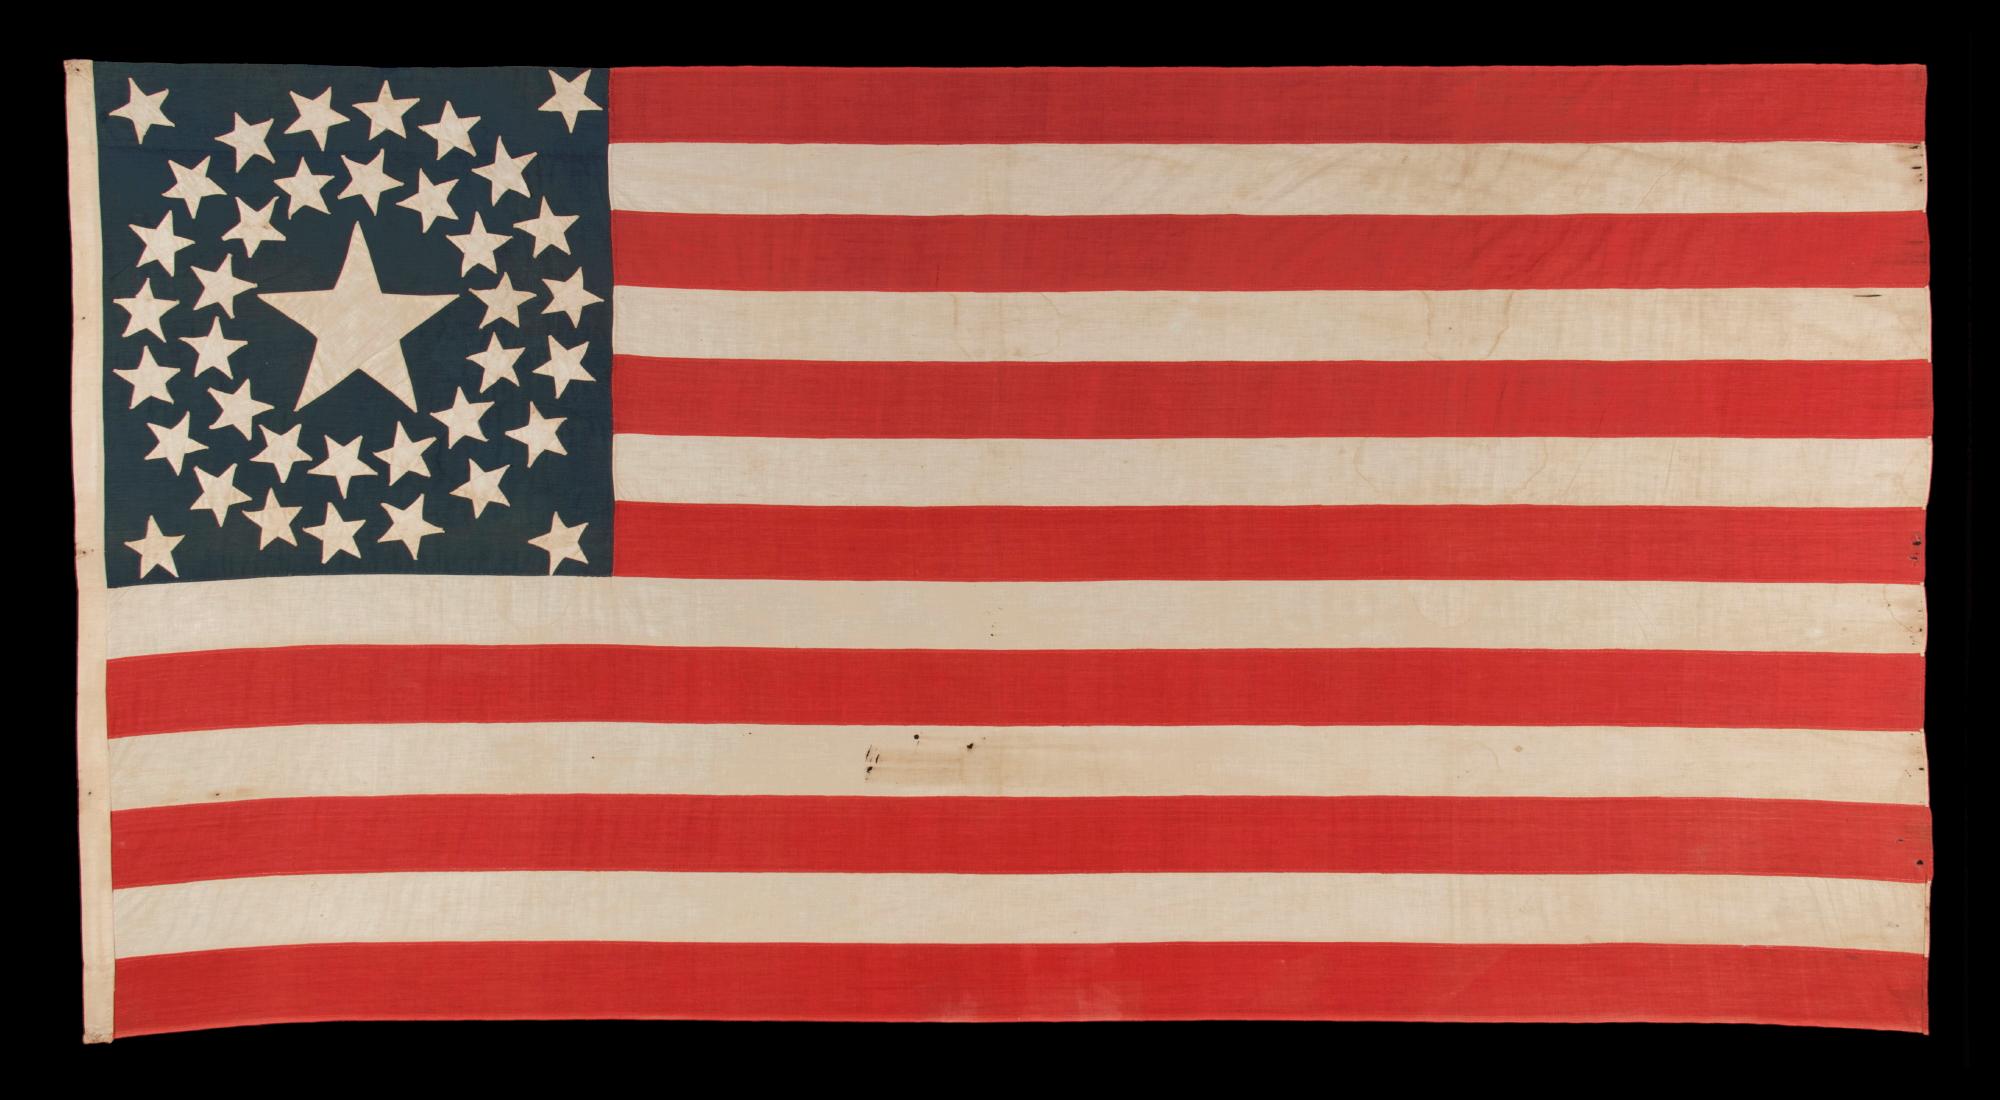 38 STAR ANTIQUE AMERICAN FLAG WITH A DOUBLE-WREATH CONFIGURATION THAT FEATURES AN ENORMOUS CENTER STAR, REFLECTS THE PERIOD OF COLORADO STATEHOOD, 1876-1889:

38 star American national flag, made entirely of plain weave cotton. The stars are